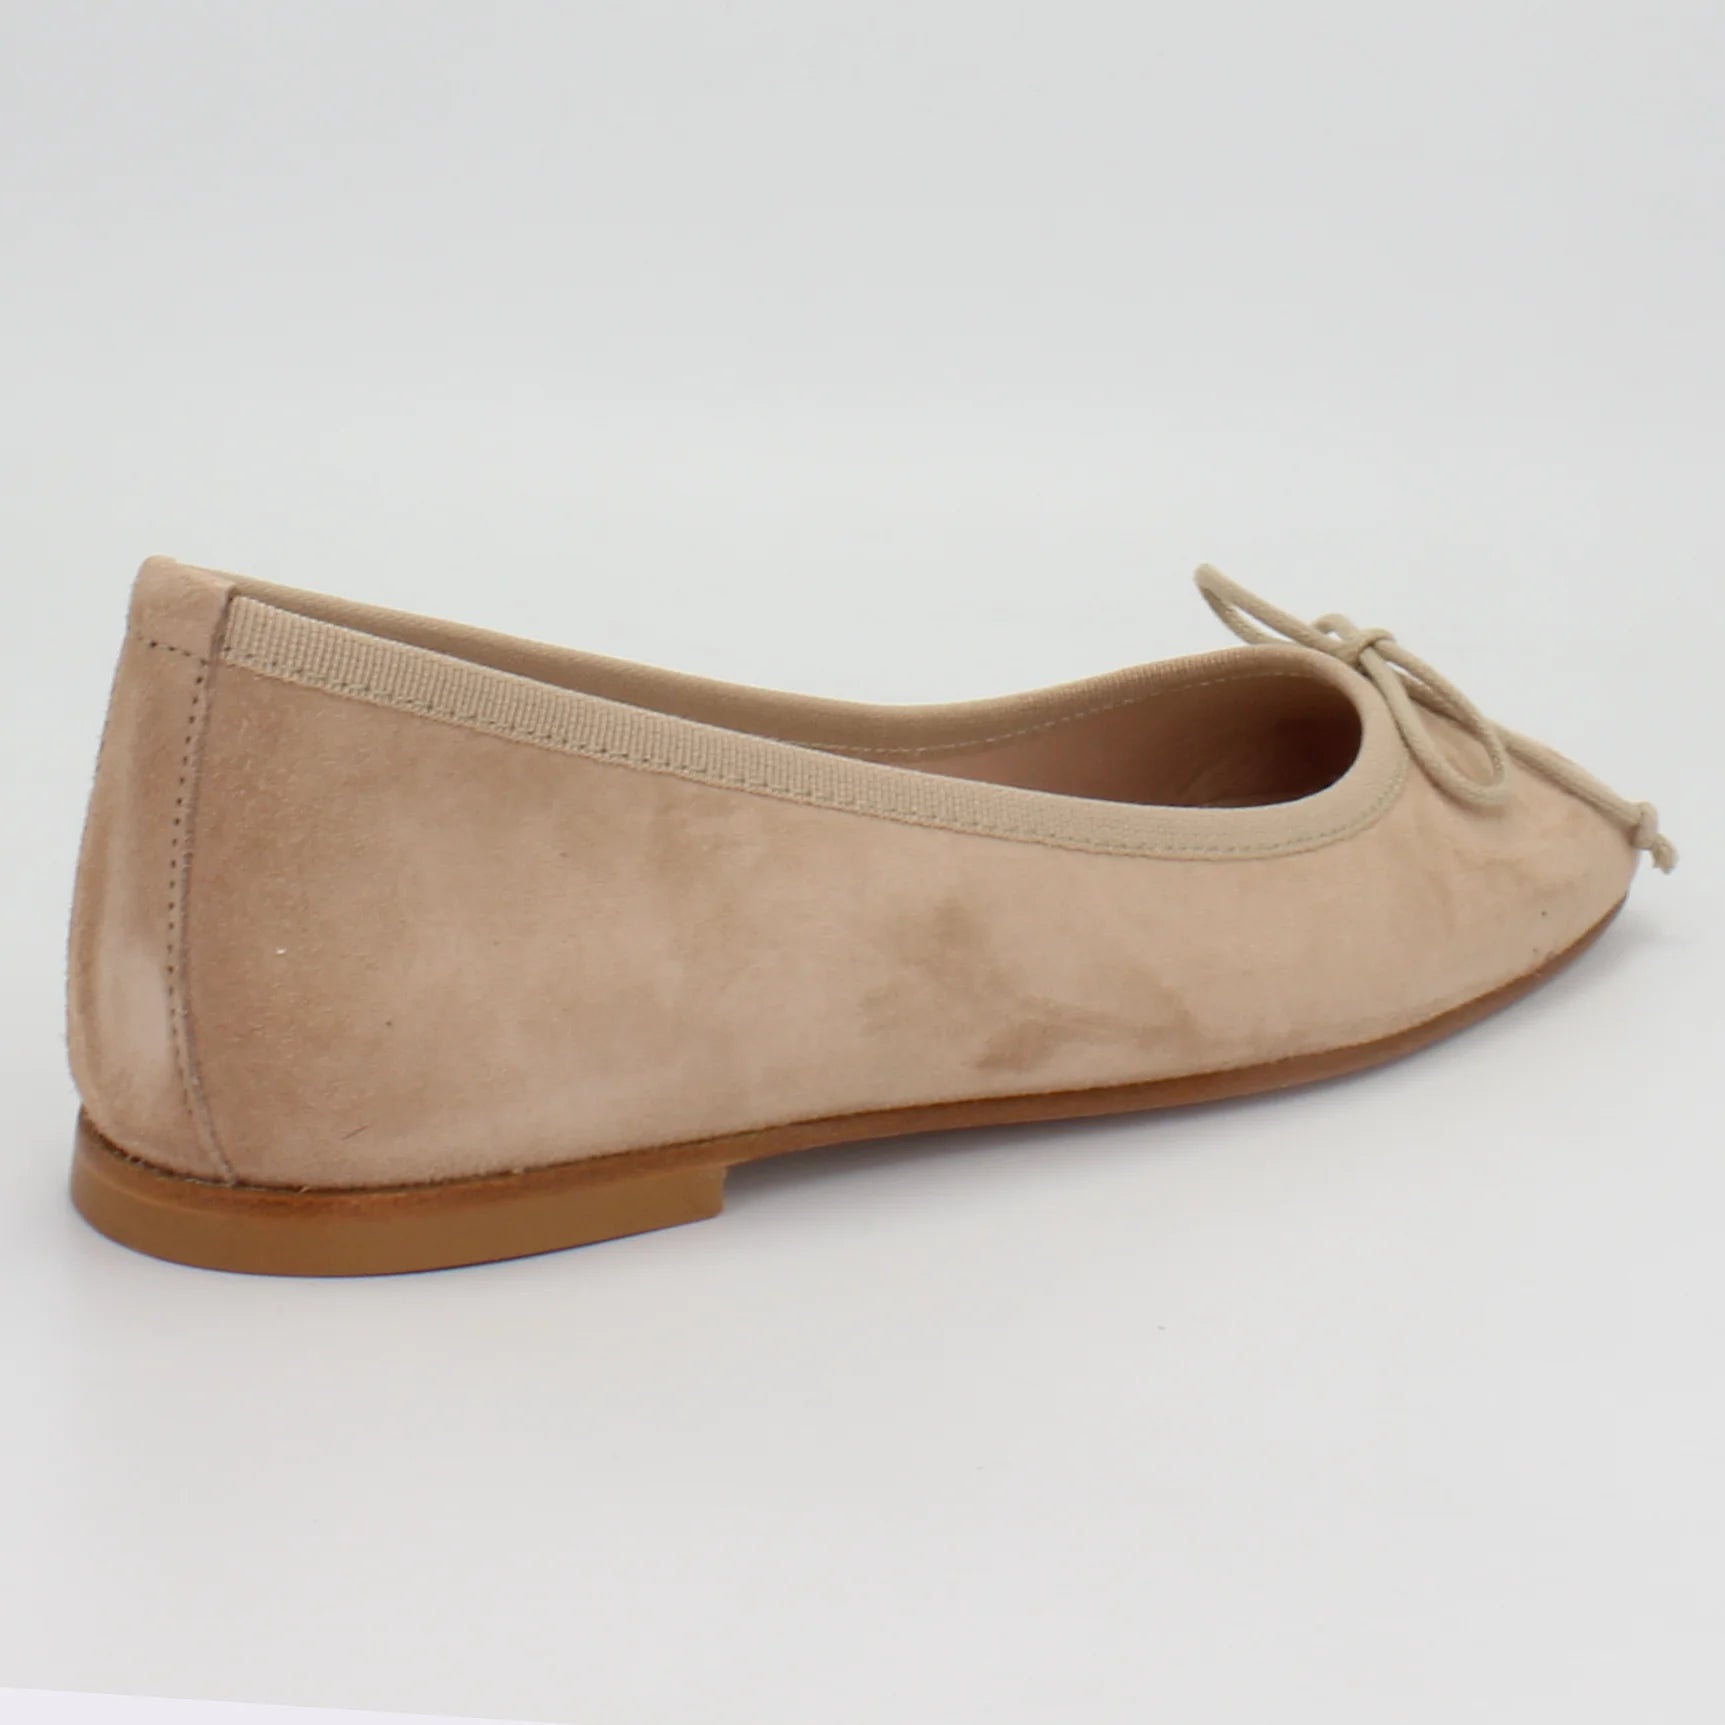 Shop Handmade Italian Leather suede ballerina pump in taupe (E485) or browse our range of hand-made Italian shoes in leather or suede in-store at Aliverti Cape Town, or shop online. We deliver in South Africa & offer multiple payment plans as well as accept multiple safe & secure payment methods.